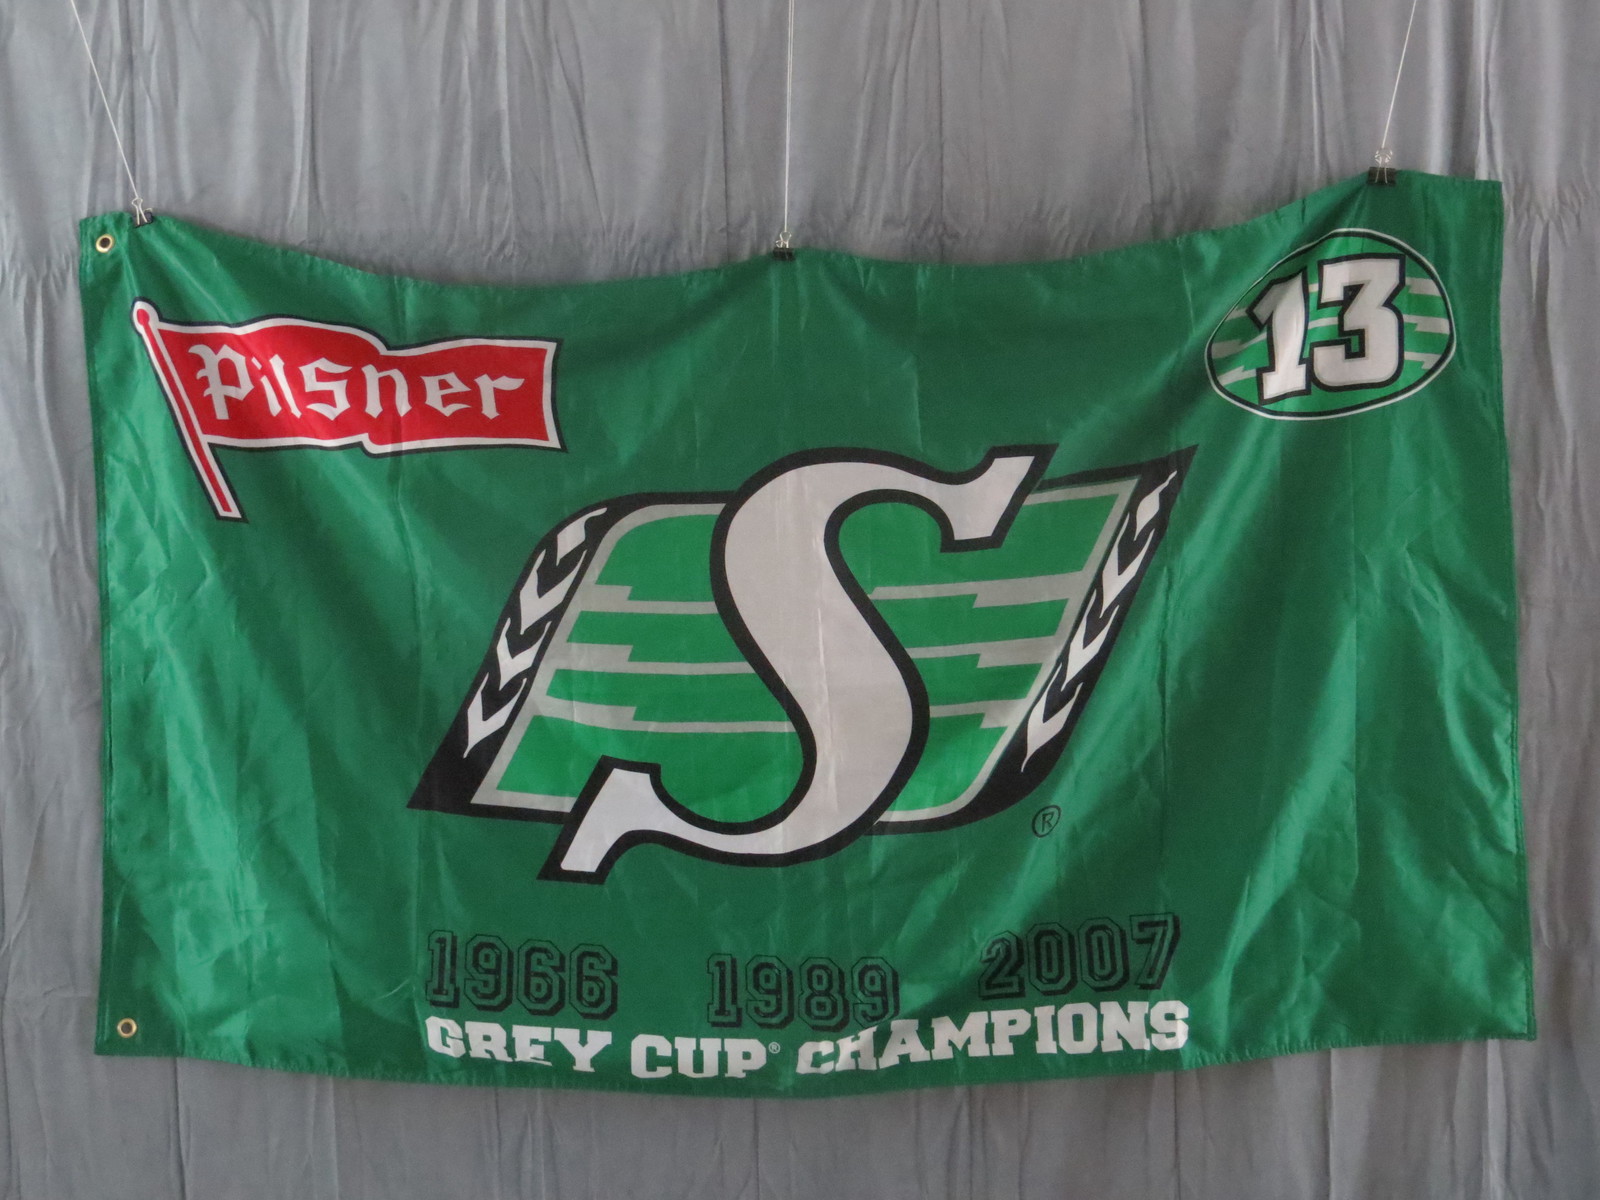 Saskatchewan Roughriders Flag - Pilsner Grey Cup Champions - Double Sided Flag - $39.00